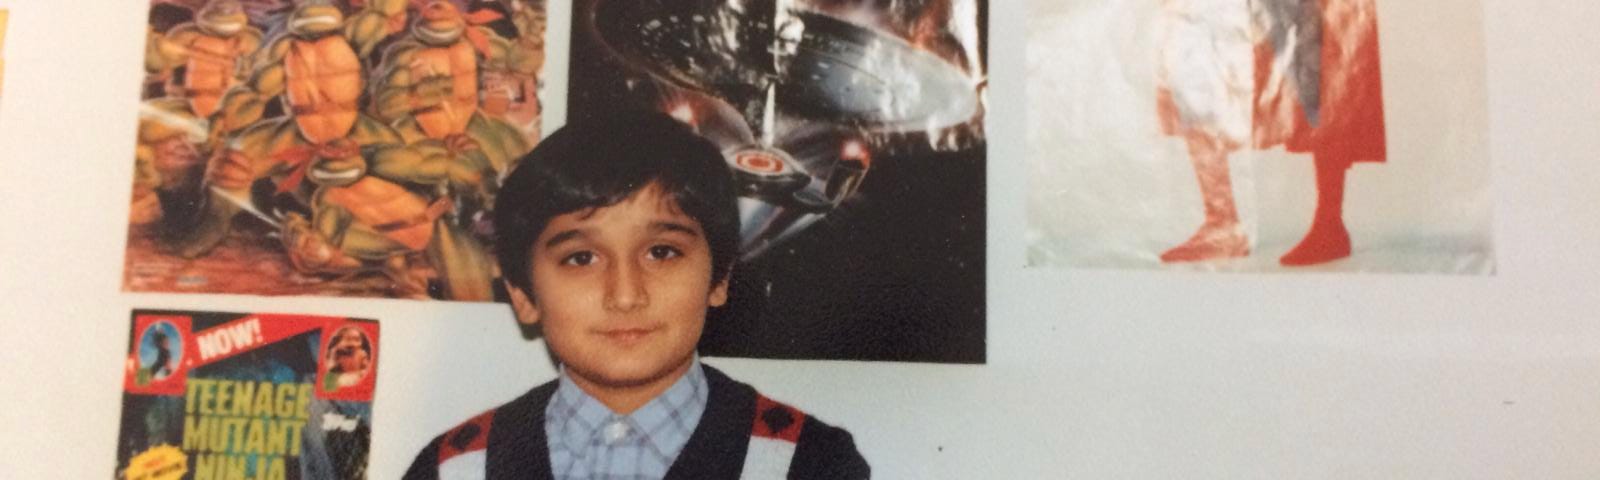 Brown boy around 13 in sweater vest and shirt with Star Trek, Superman Teenage Mutant Ninja Turtles posters behind on wall. Small television on right.